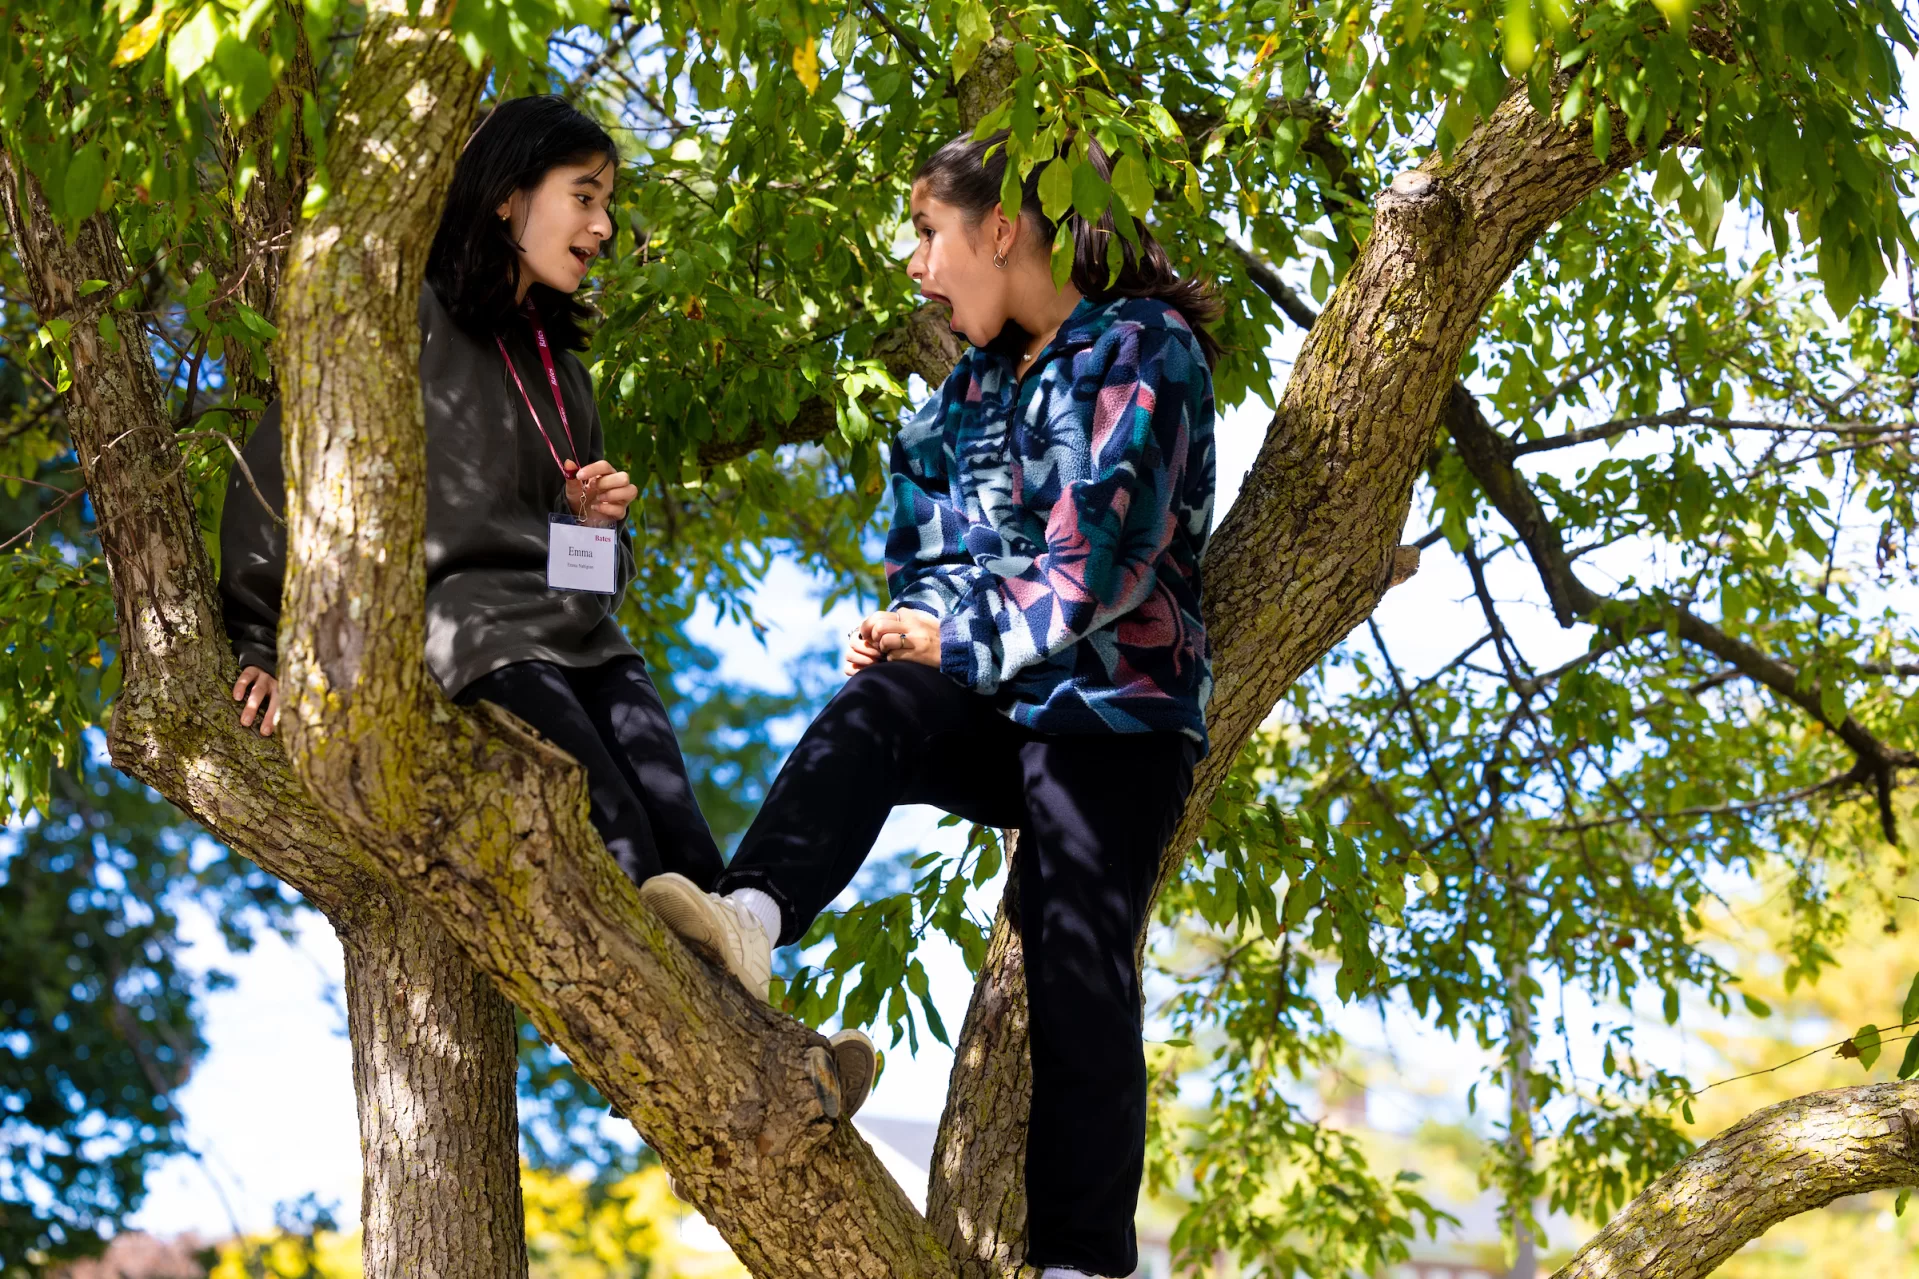 “I wanted to give her the college tree experience.”

— Elizabeth Nahigian ’26 of Needham, Mass., explains why she took sister Emma, 14, up a tree behind Lane Hall for an opportunity to catch up on Saturday afternoon. Elizabeth had climbed this very tree with Bates friends and wanted to do the same with Emma.

“We had fun,” she said, as they disembarked to meet their parents.

Swipe left for a few other photographs of siblings on Saturday of Back to Bates weekend. And watch for more coverage later this week.

Looking forward to the Back to Bates Alumni Weekend on Oct. 15.